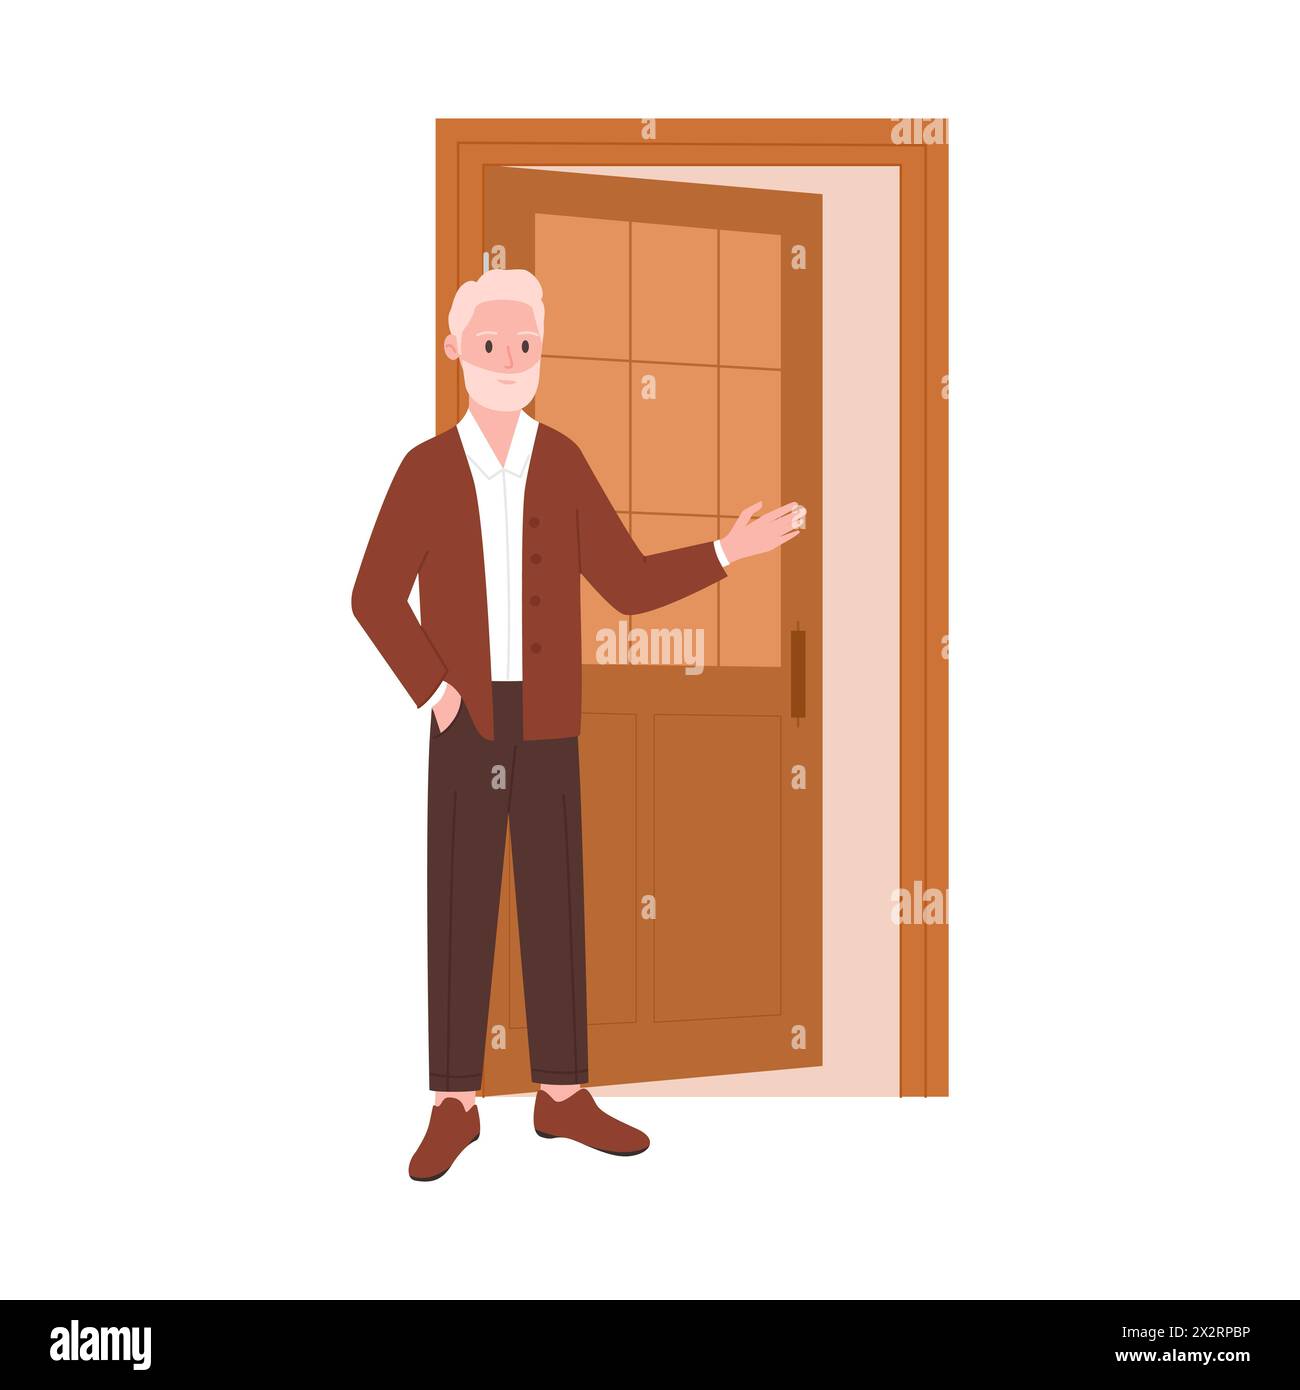 Elderly man with beard inviting entry, pointing to open brown door vector illustration Stock Vector